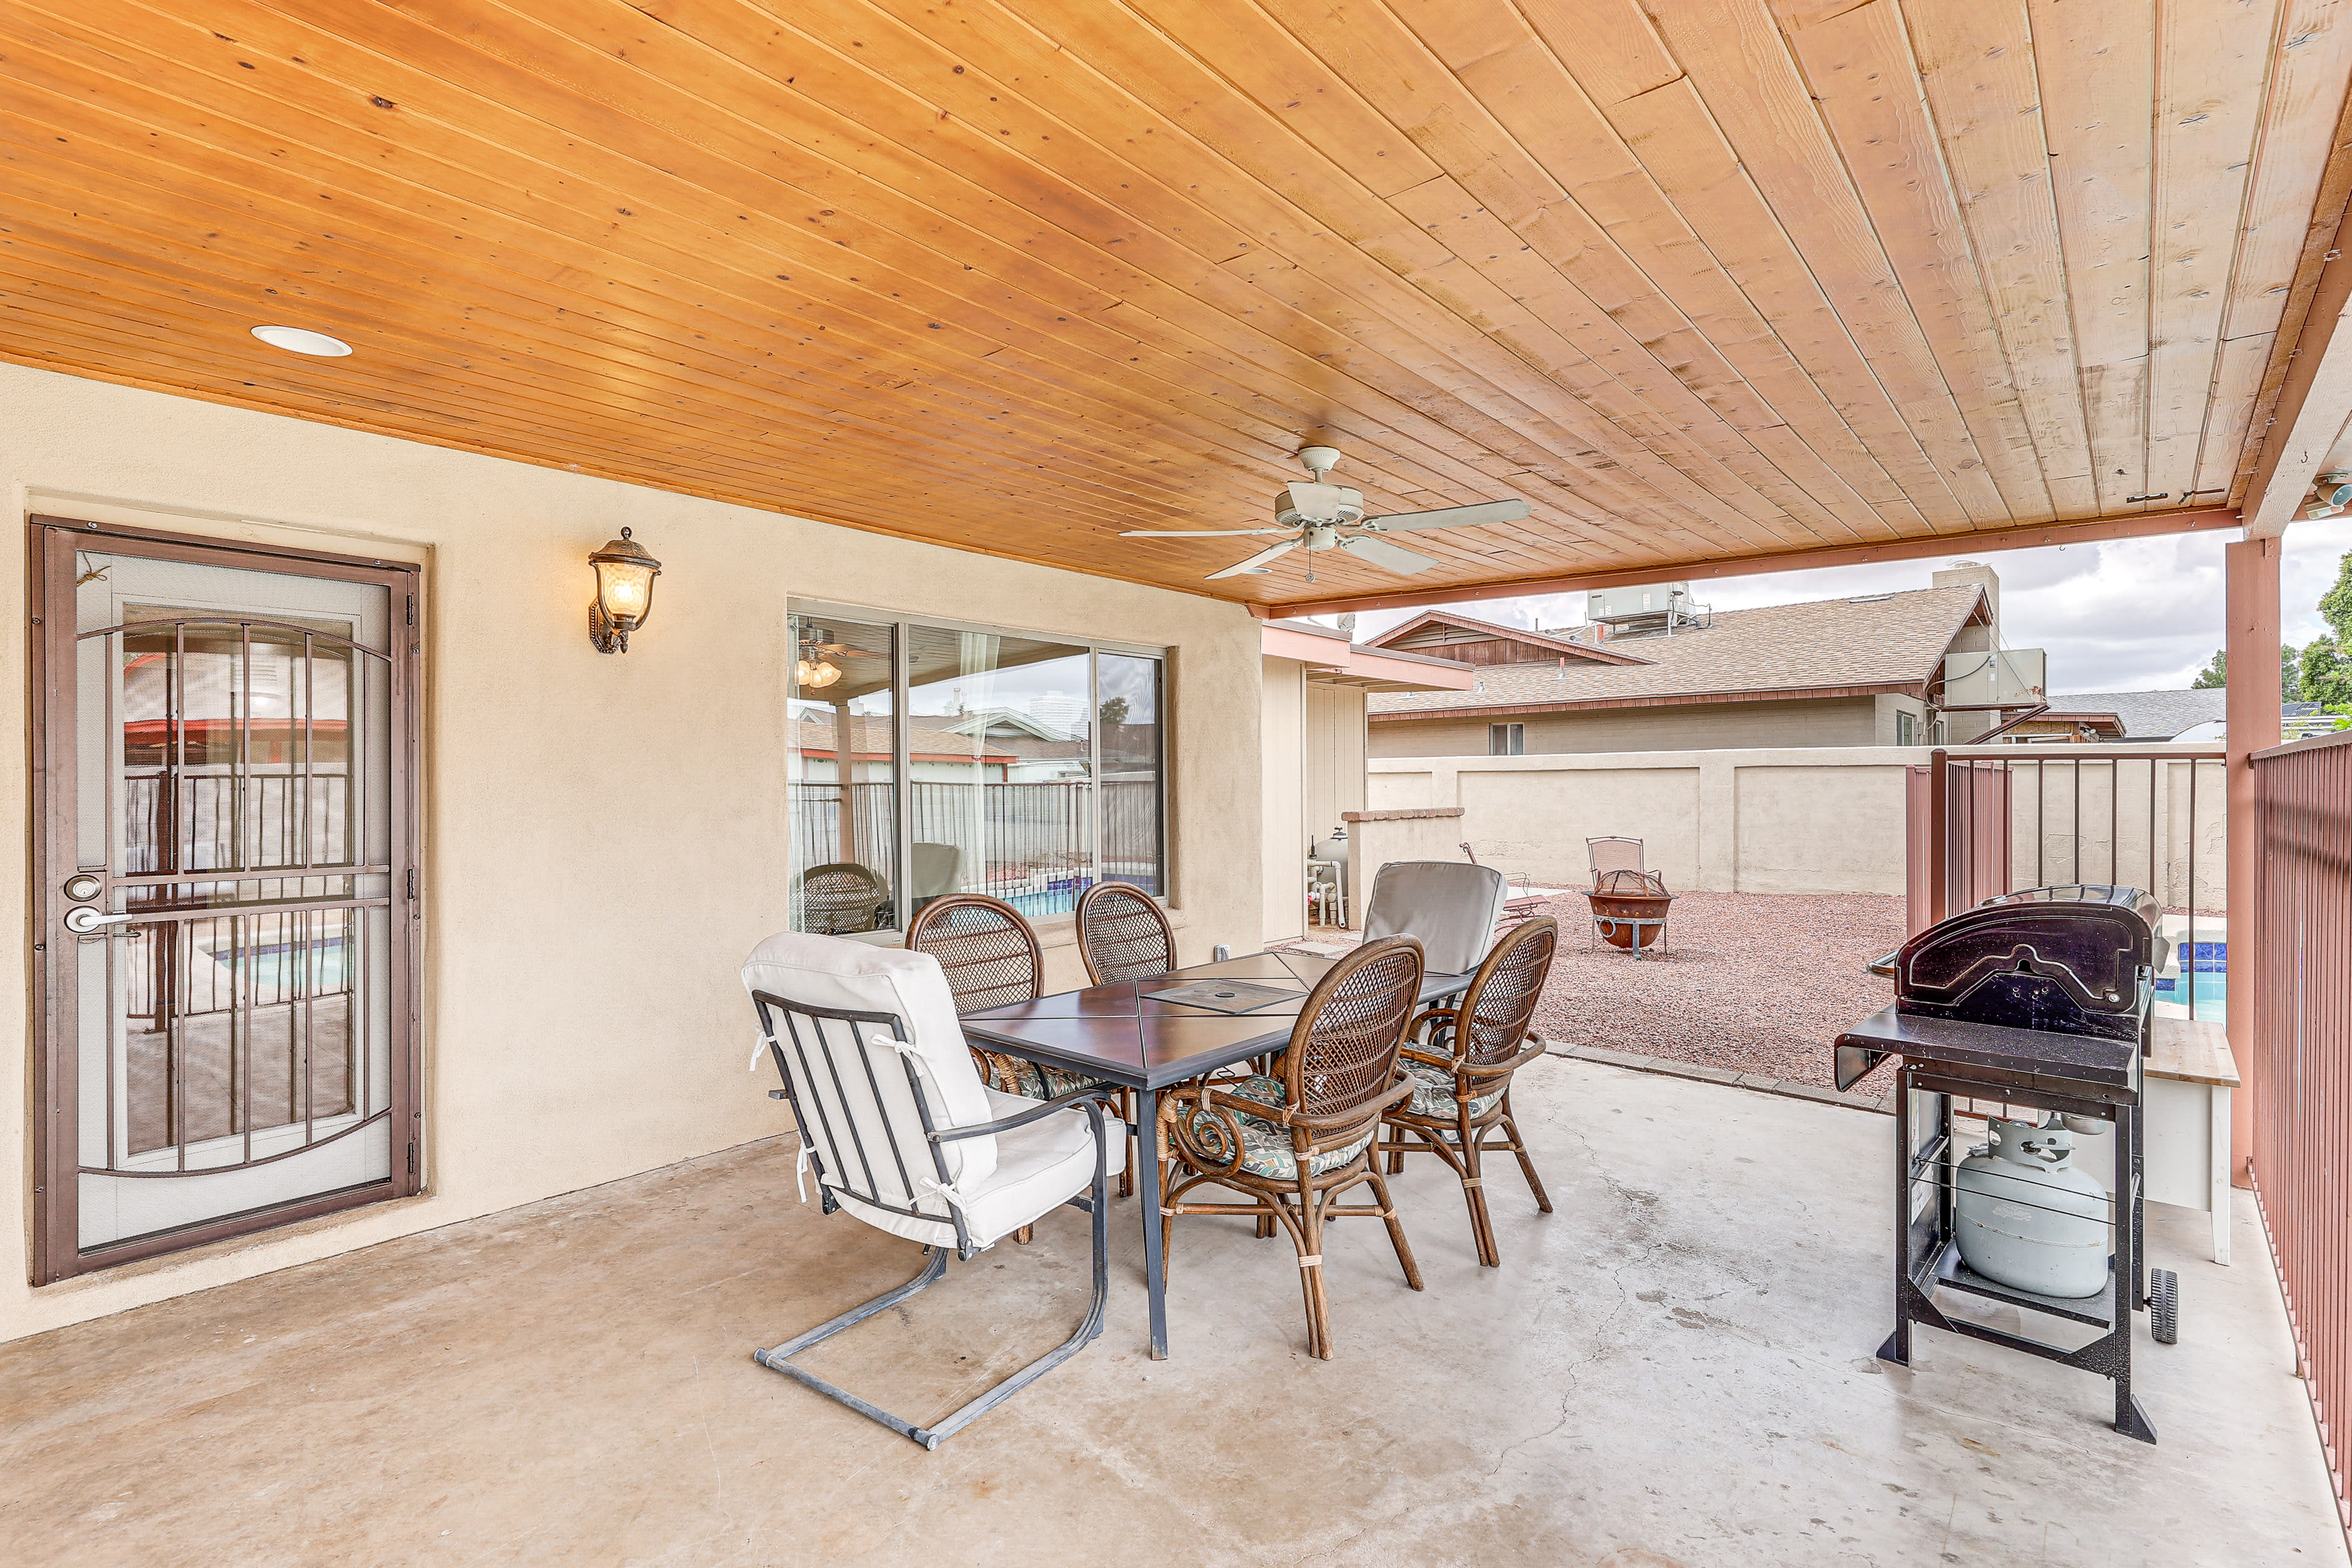 Covered Patio | Outdoor Dining | Gas Grill